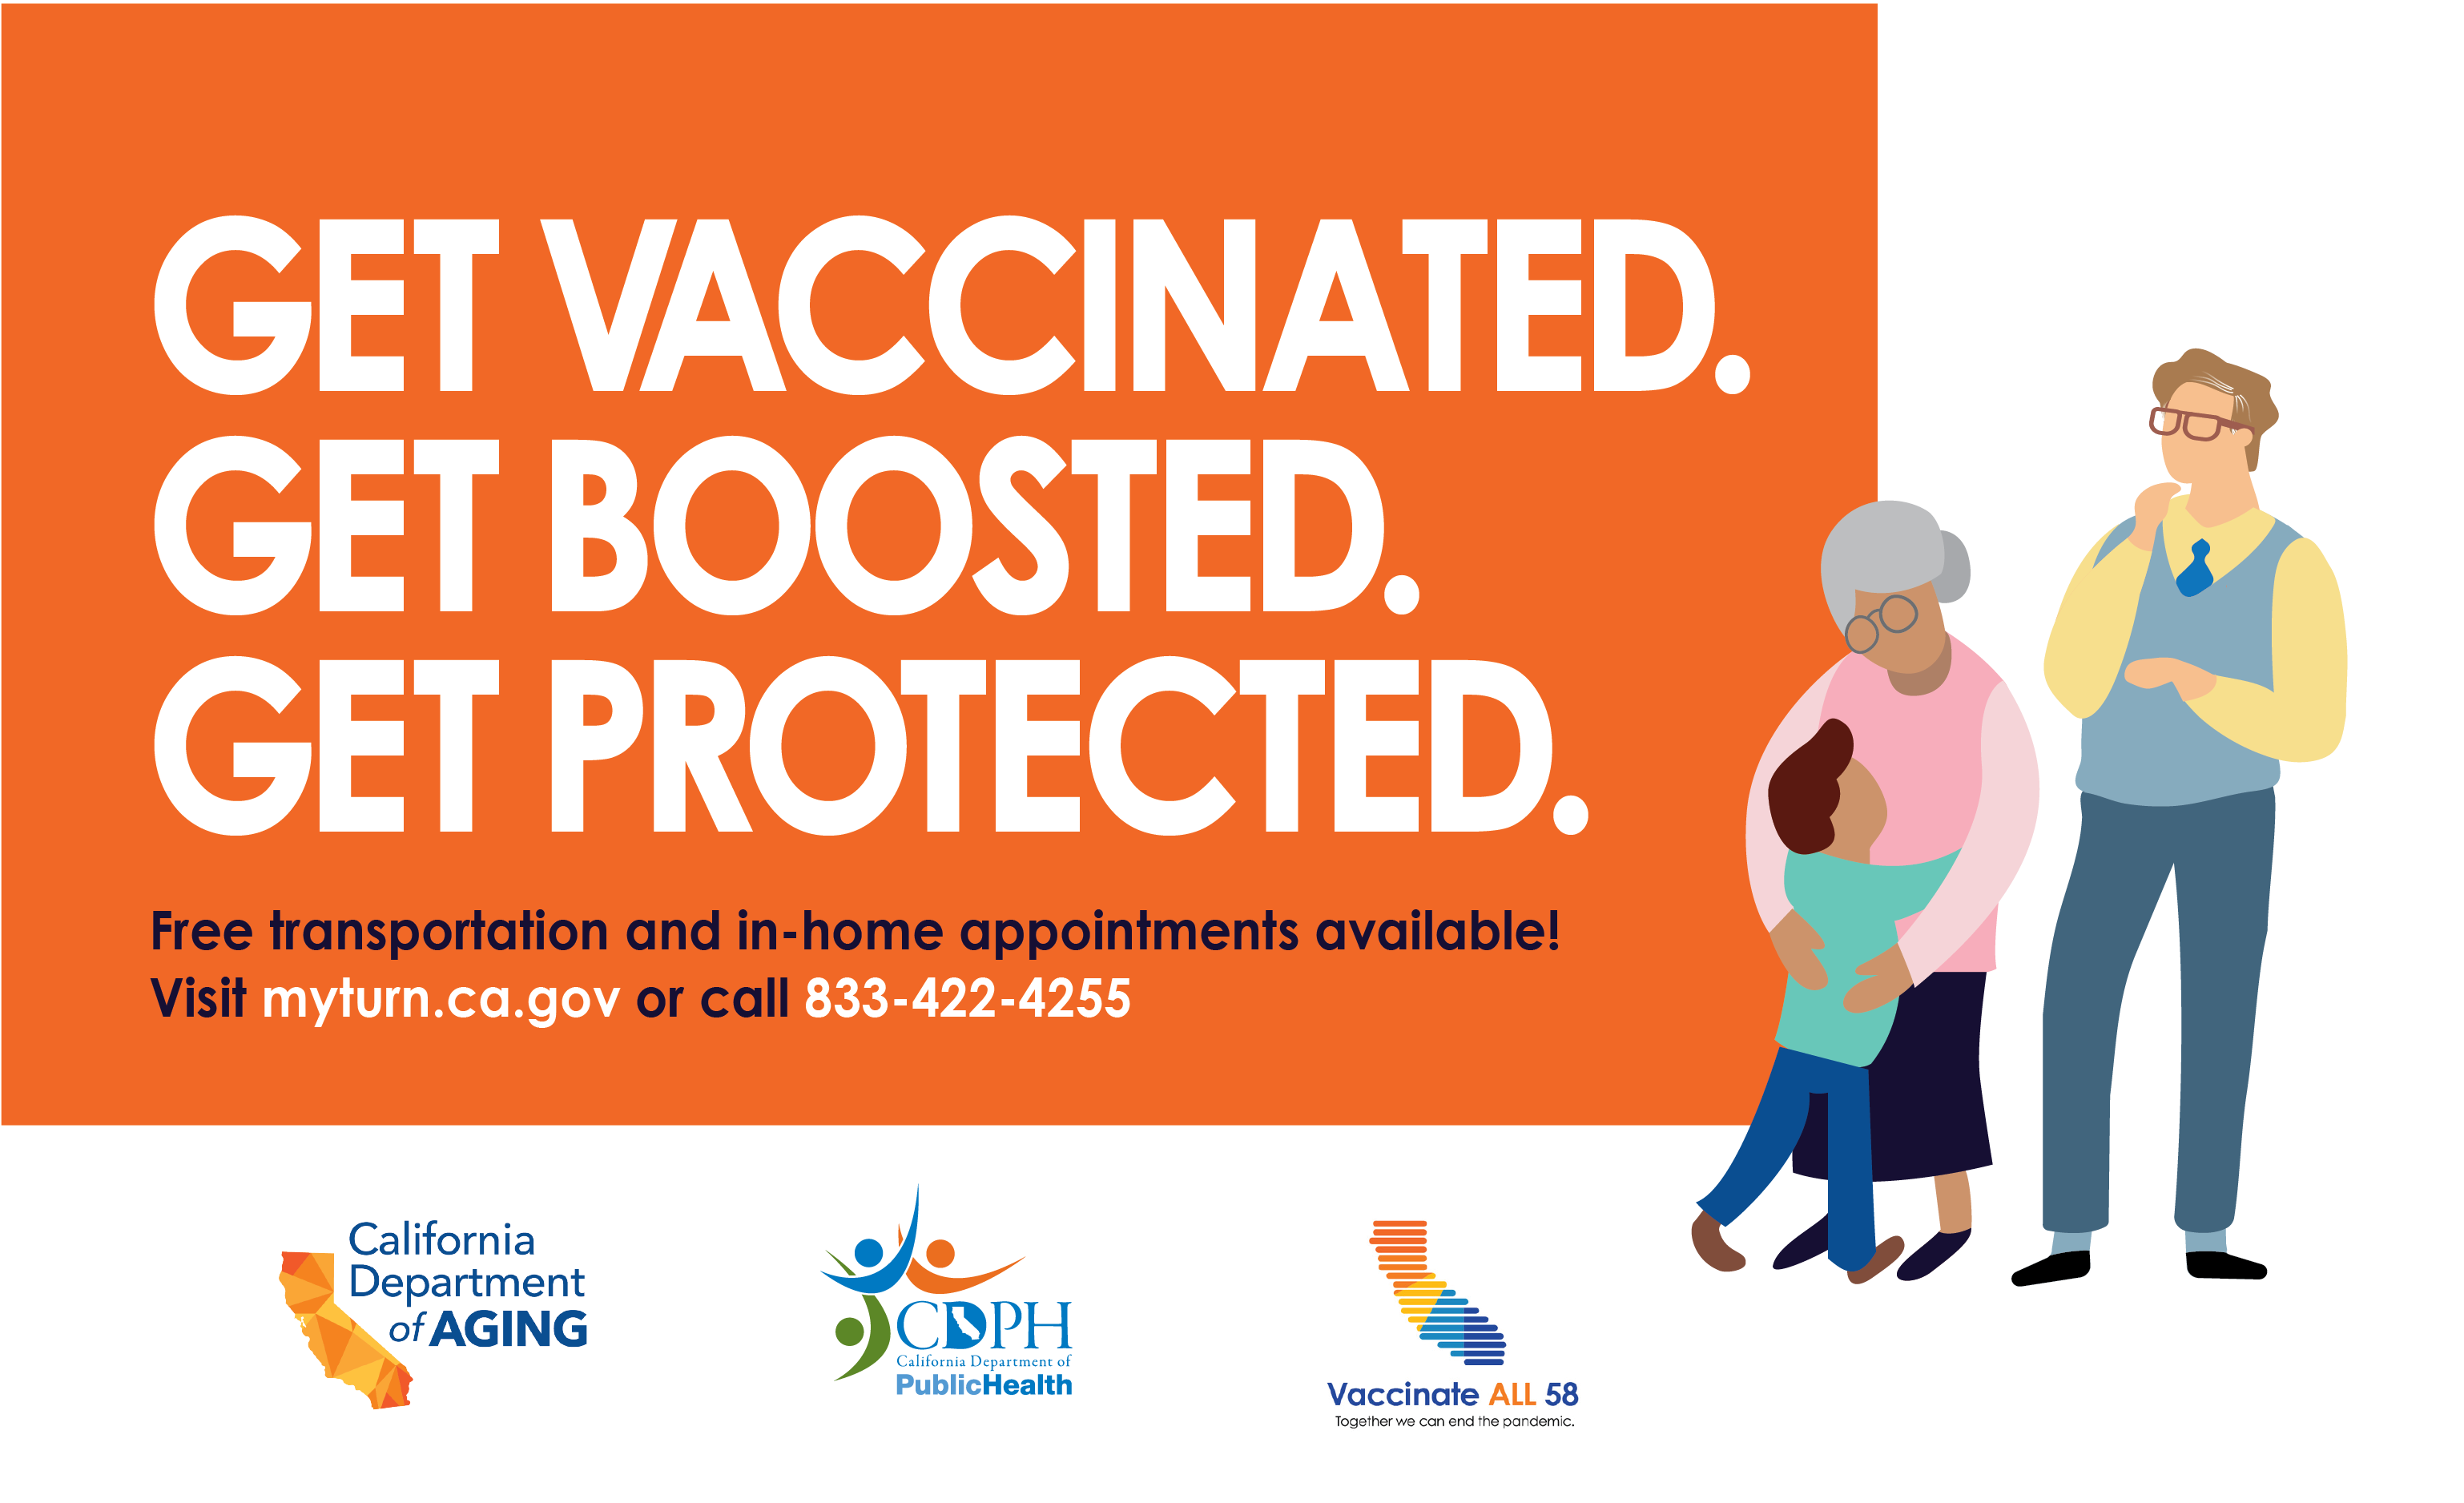 Get Vaccinated. Get Boosted. Get Protected. White words on orange background with three individuals on the right side of the image.